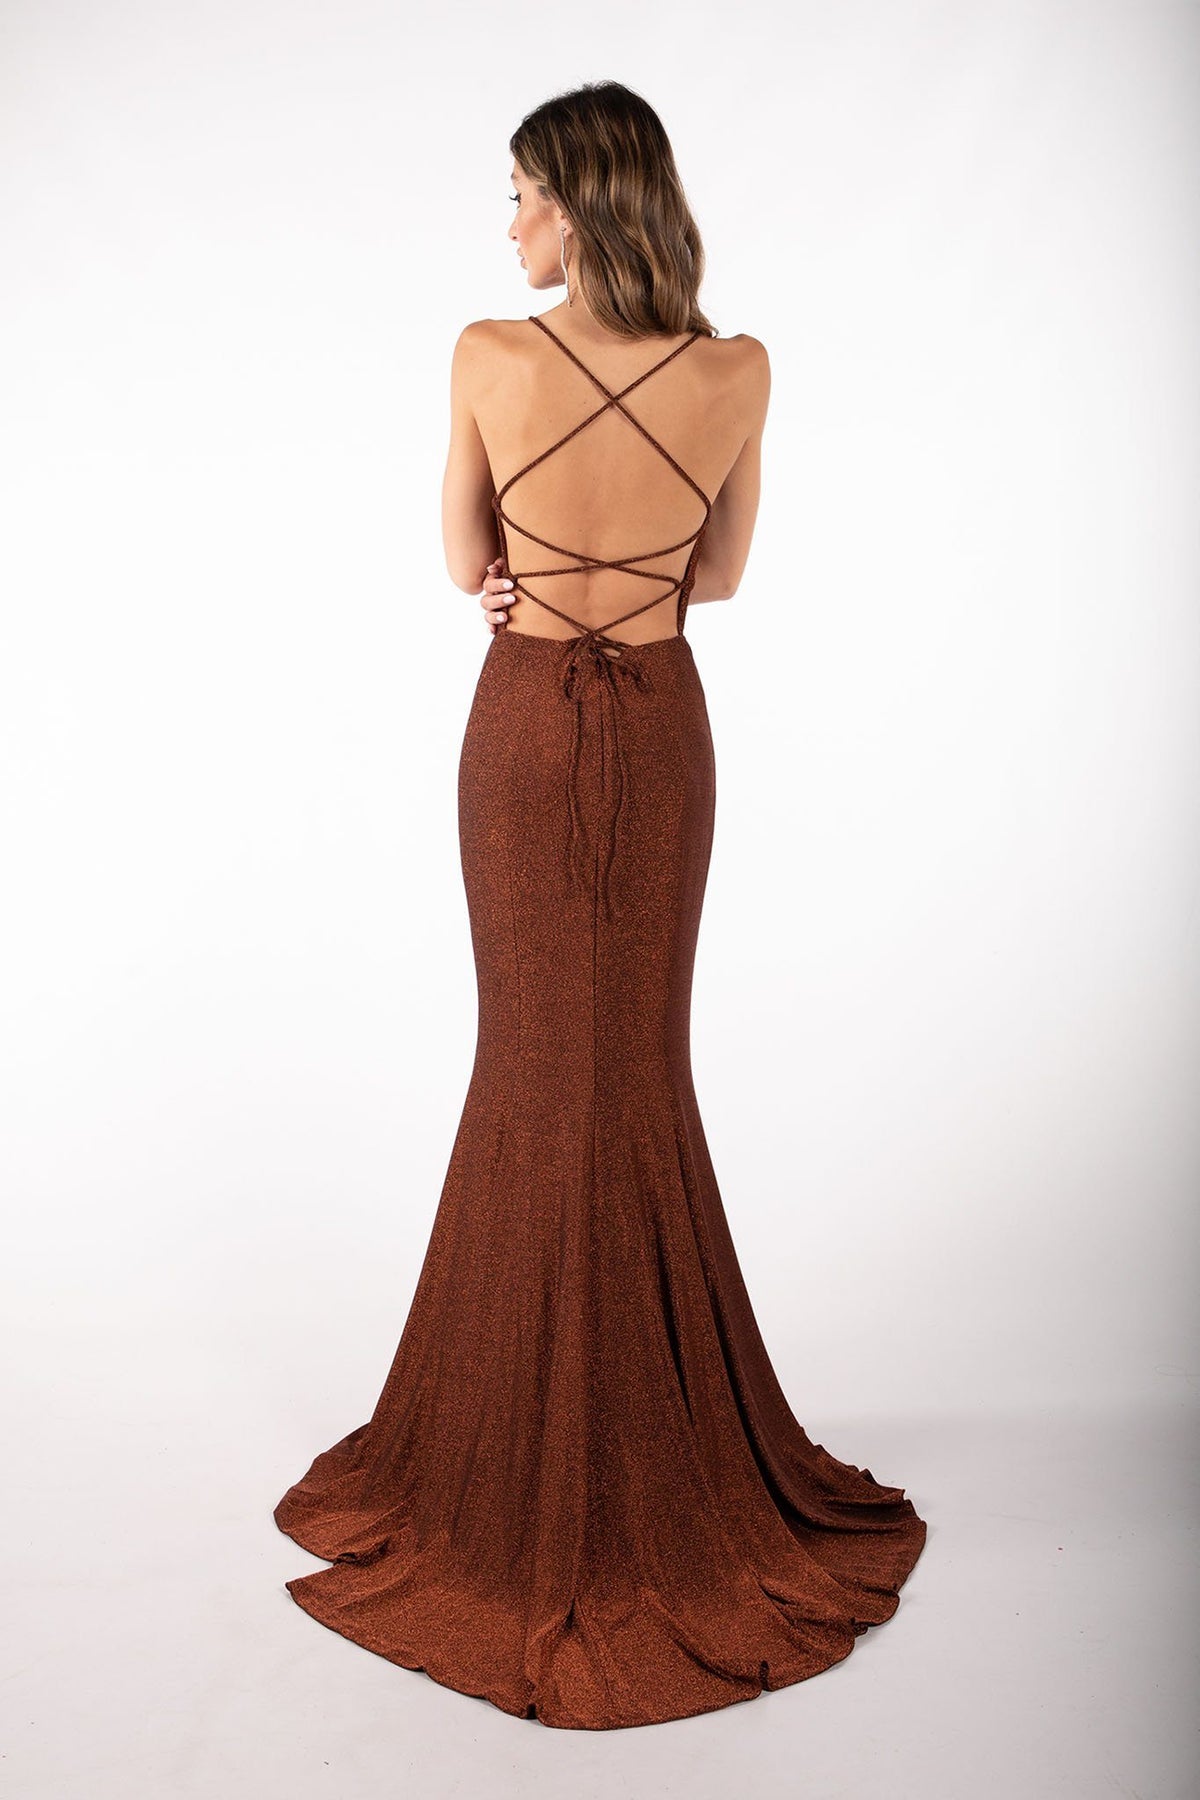 Lace Up Open Back and Small Train Design of Shimmer Copper Brown Colored Maxi Evening Gown with V Neck, Side Split